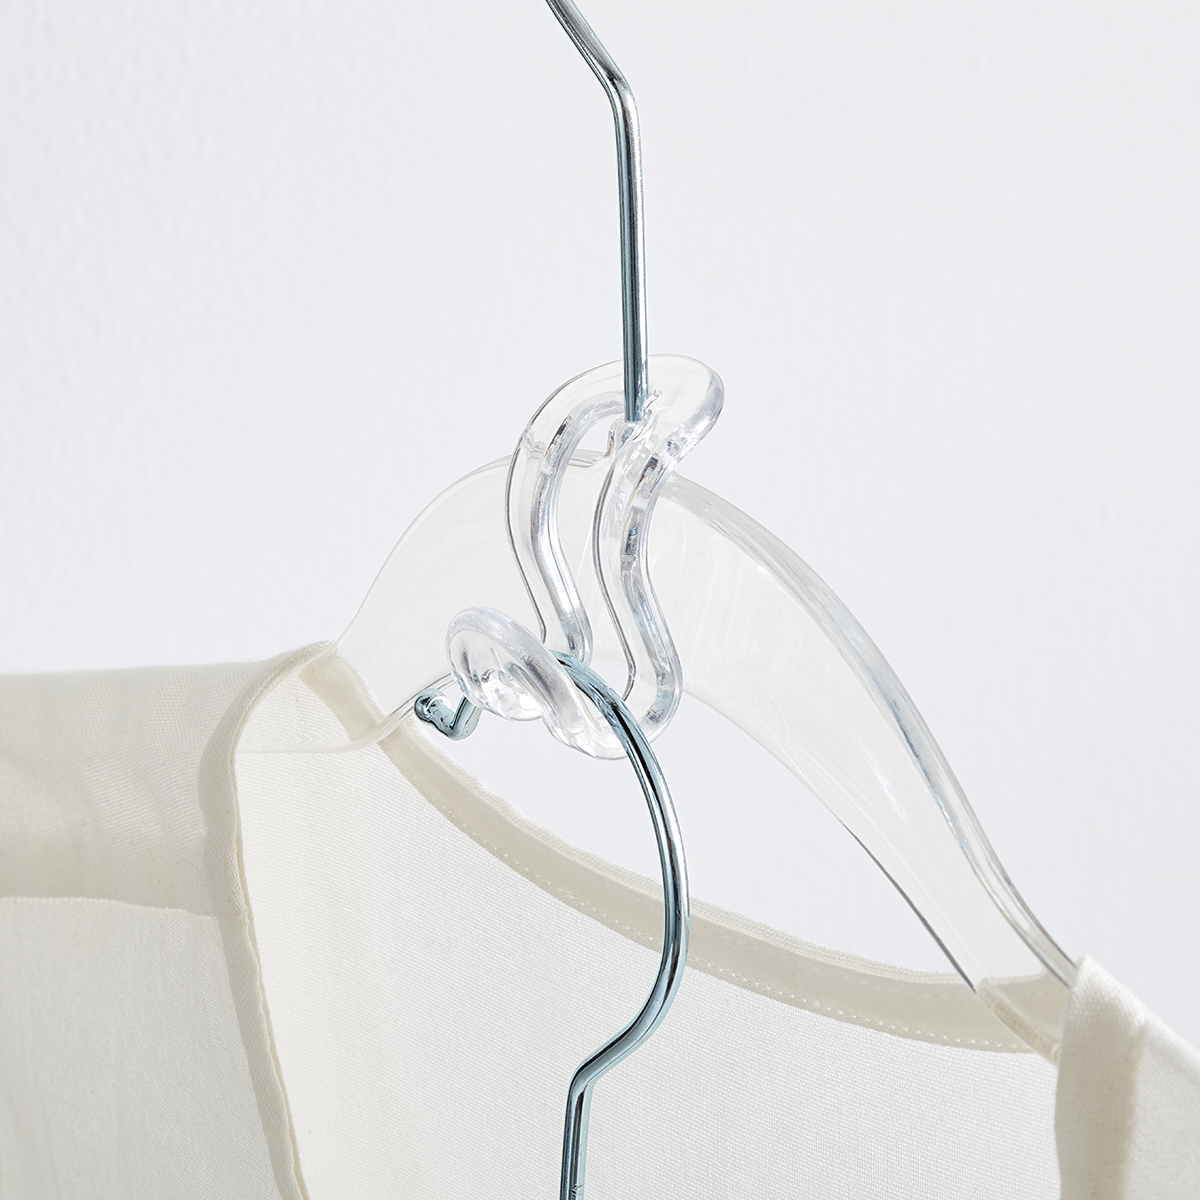 https://www.containerstore.com/catalogimages/484422/10089632_Plastic_Hanger_Hooks_10_pac.jpg